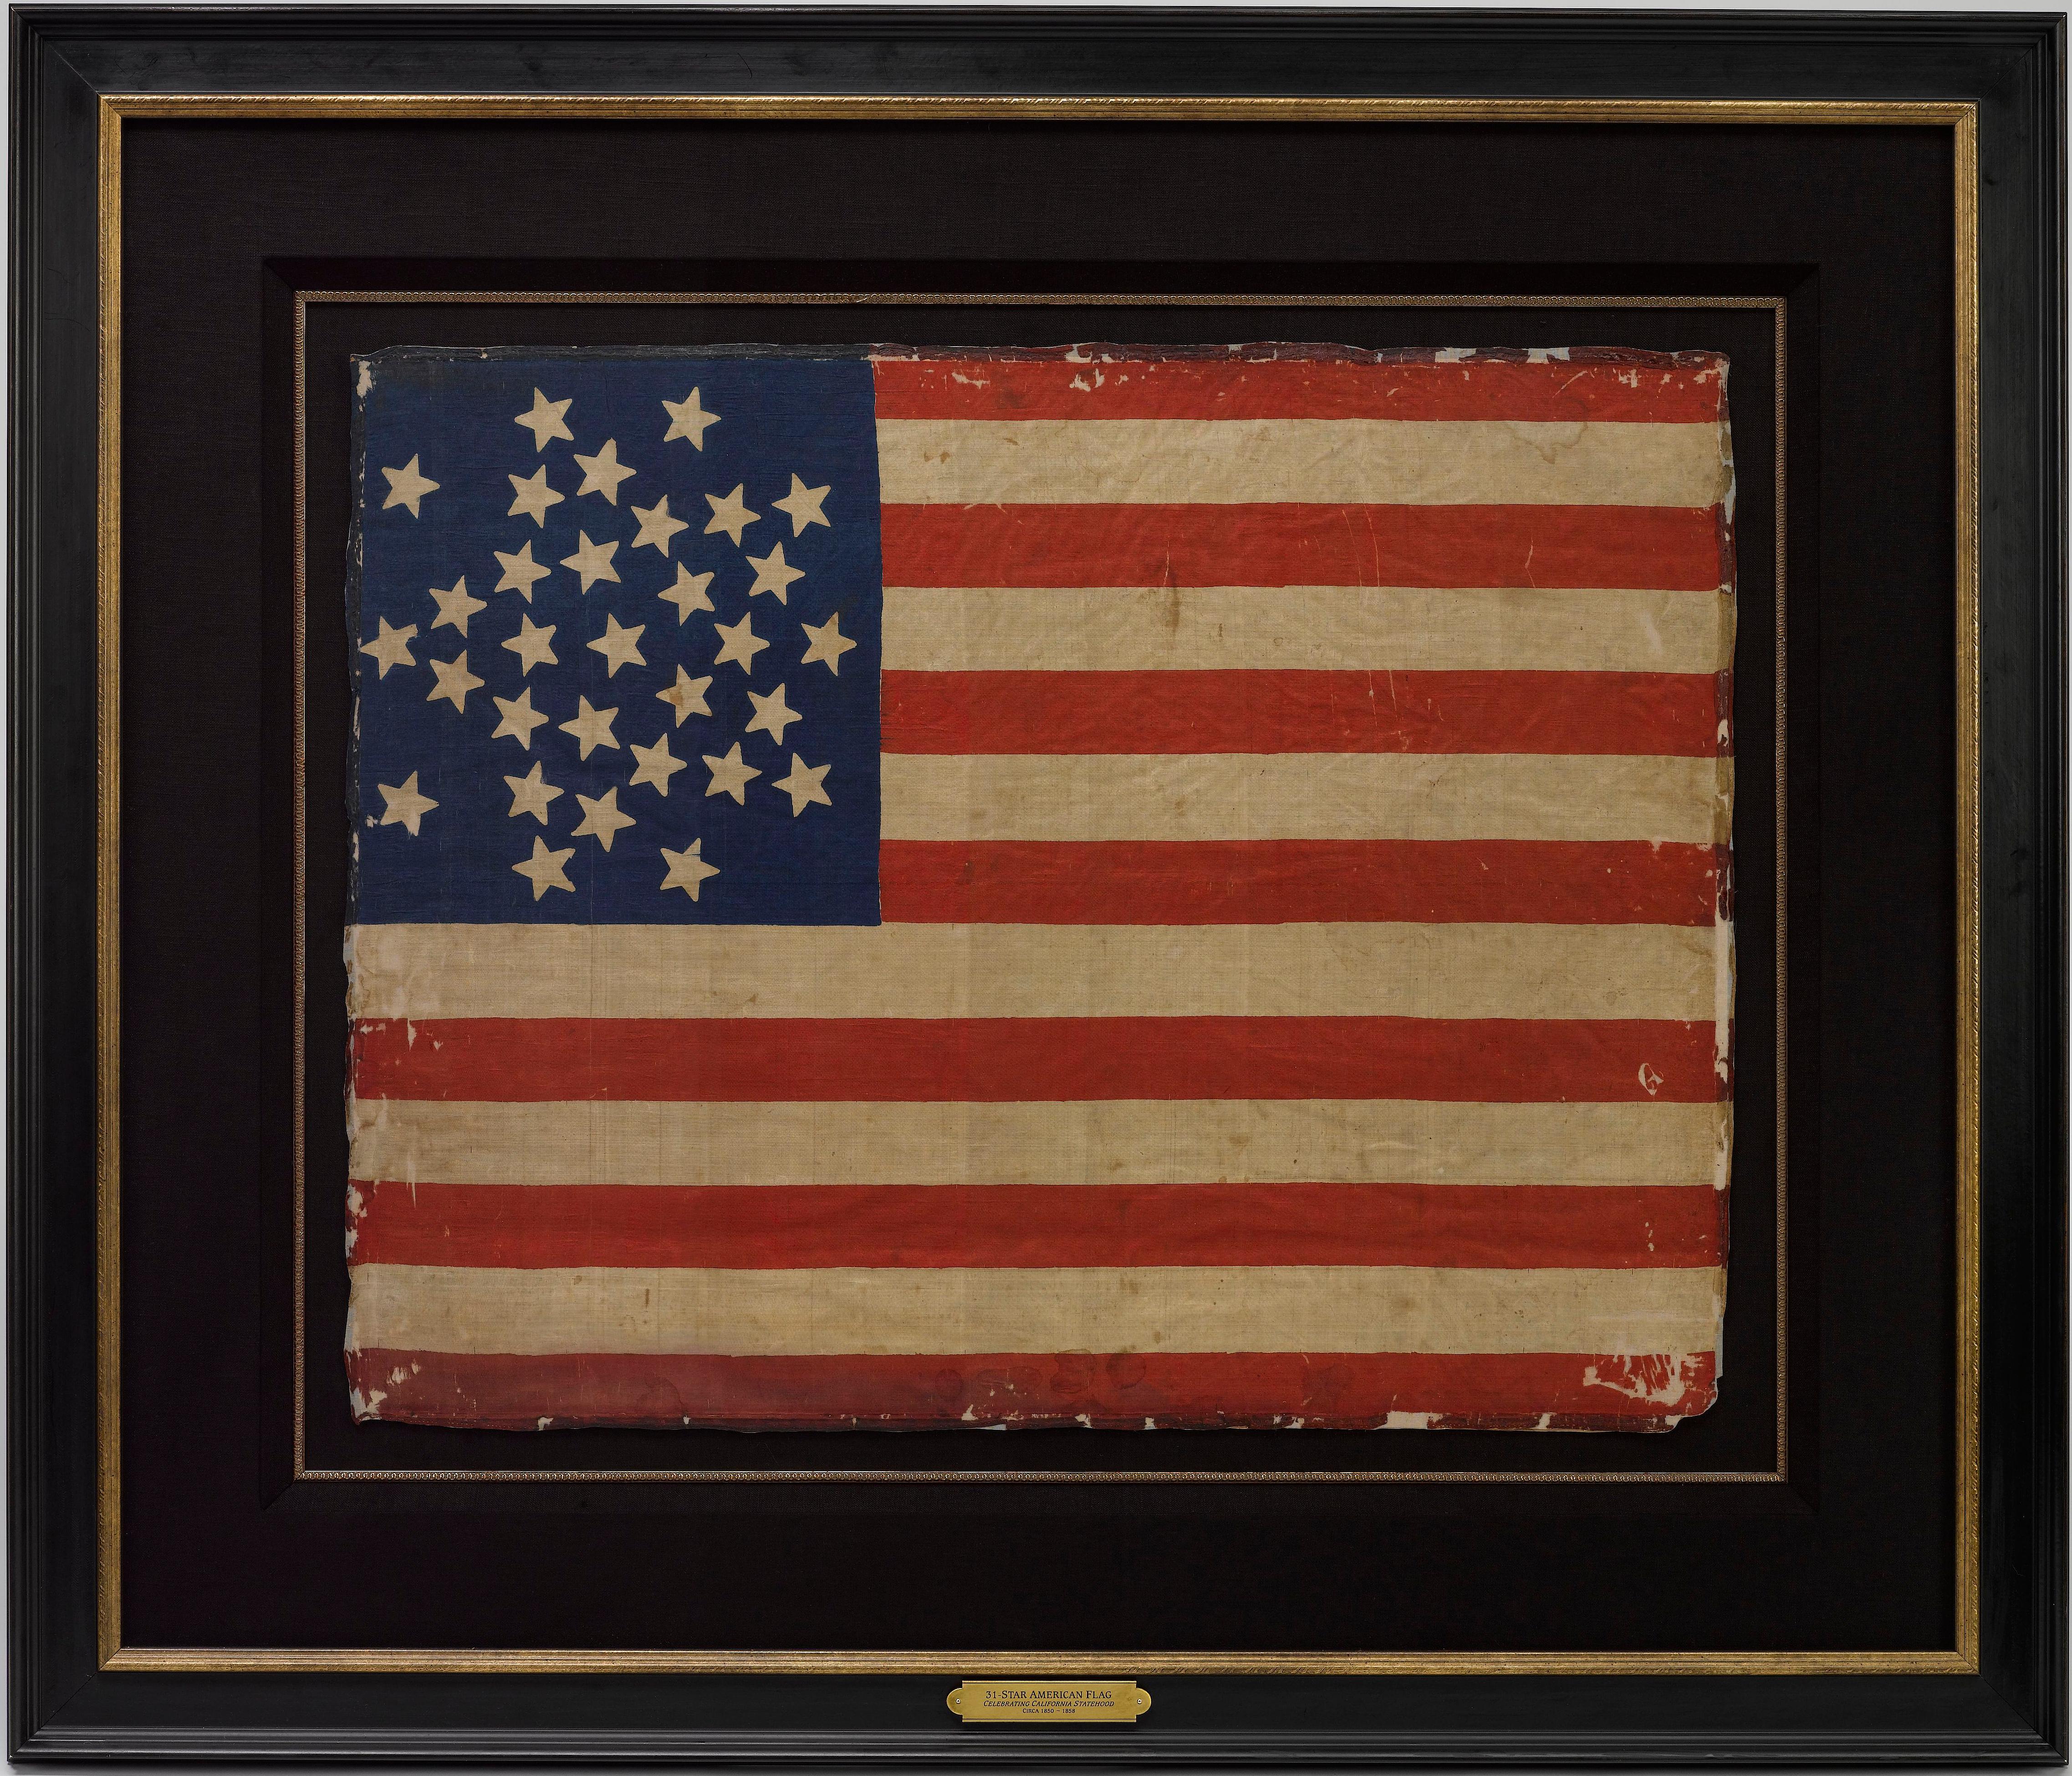 This is a rare 31-star medallion printed American flag, celebrating the addition of California to the Union. The flag is printed on silk and has a spectacular “Great Star” canton pattern. The dark blue canton has 26 white stars, arranged into the